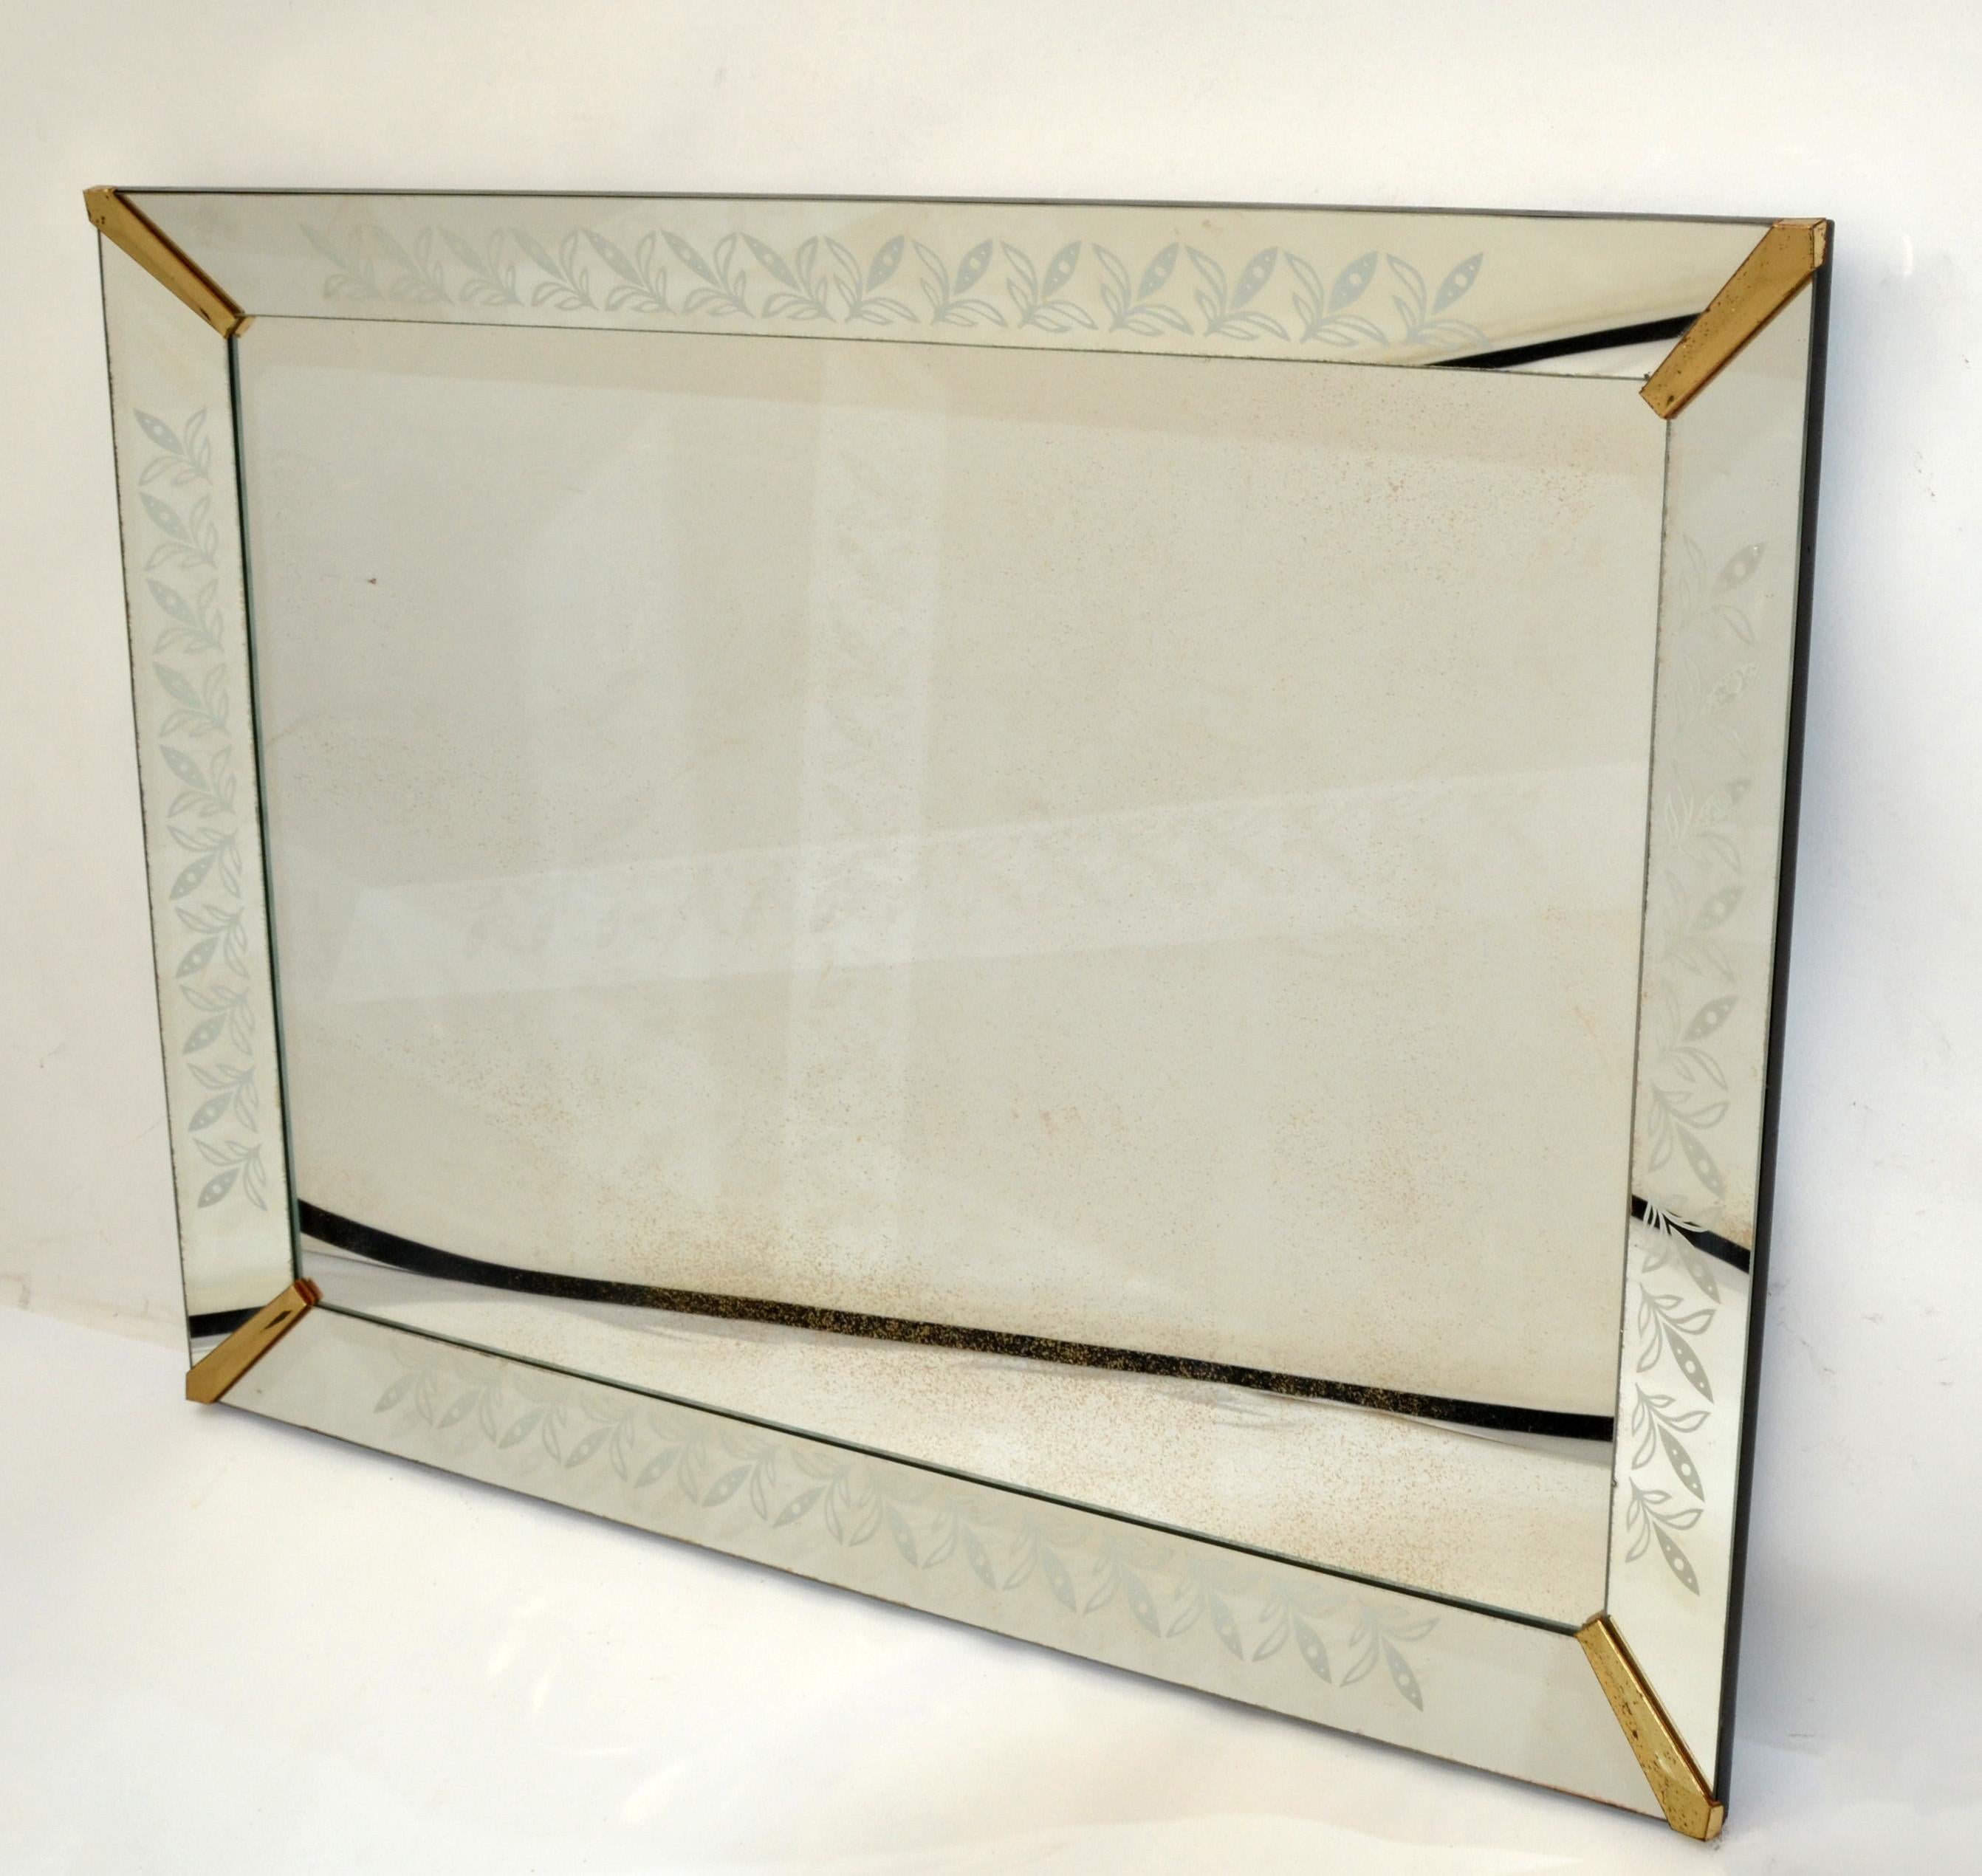 1940s Art Deco Venetian Style Etched Wall Mirror with Brass Finished Corners For Sale 9